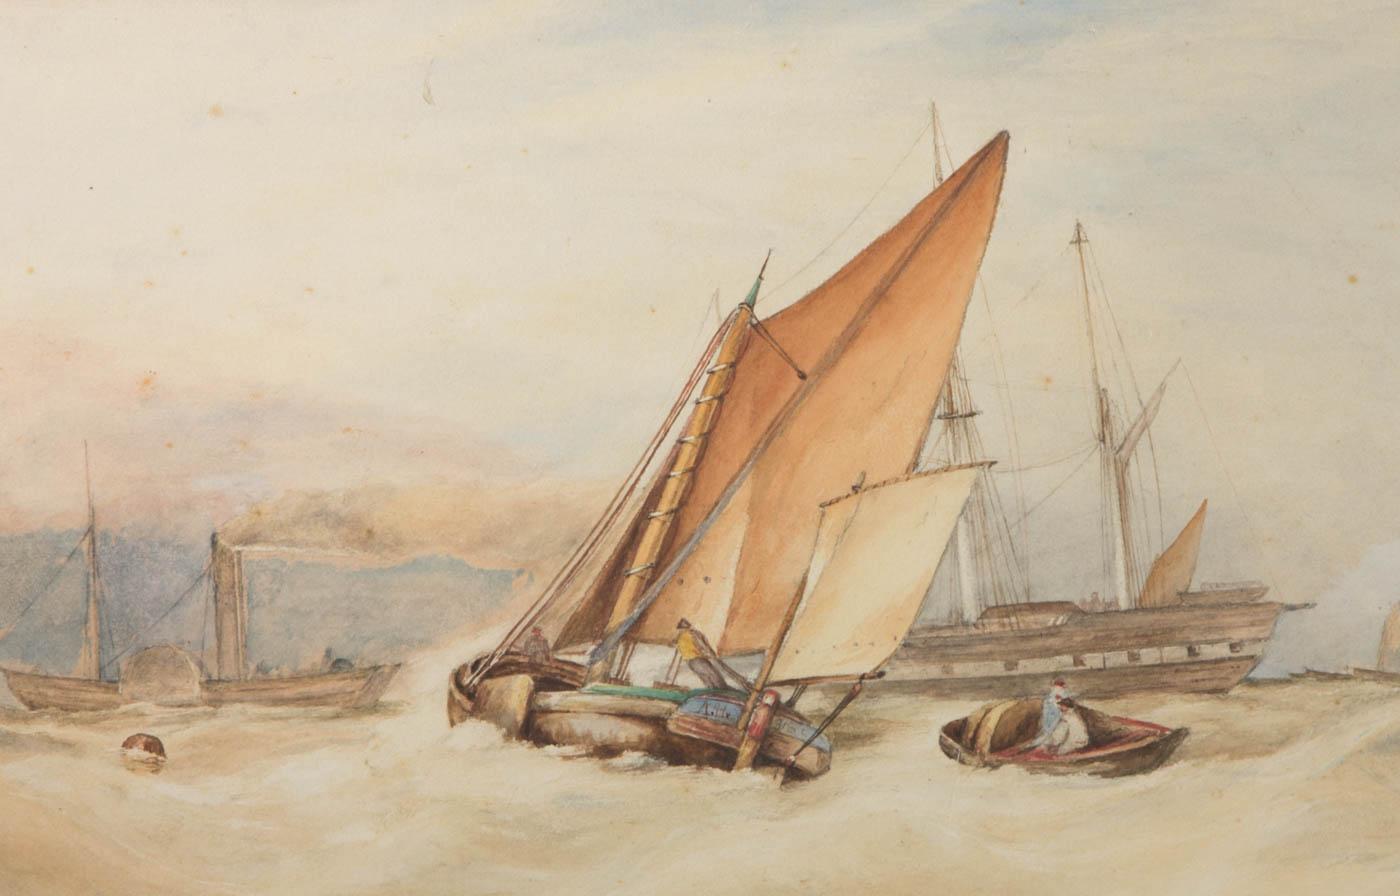 A.H. - 1885 Watercolour, Boats at Sea - Beige Figurative Art by Unknown